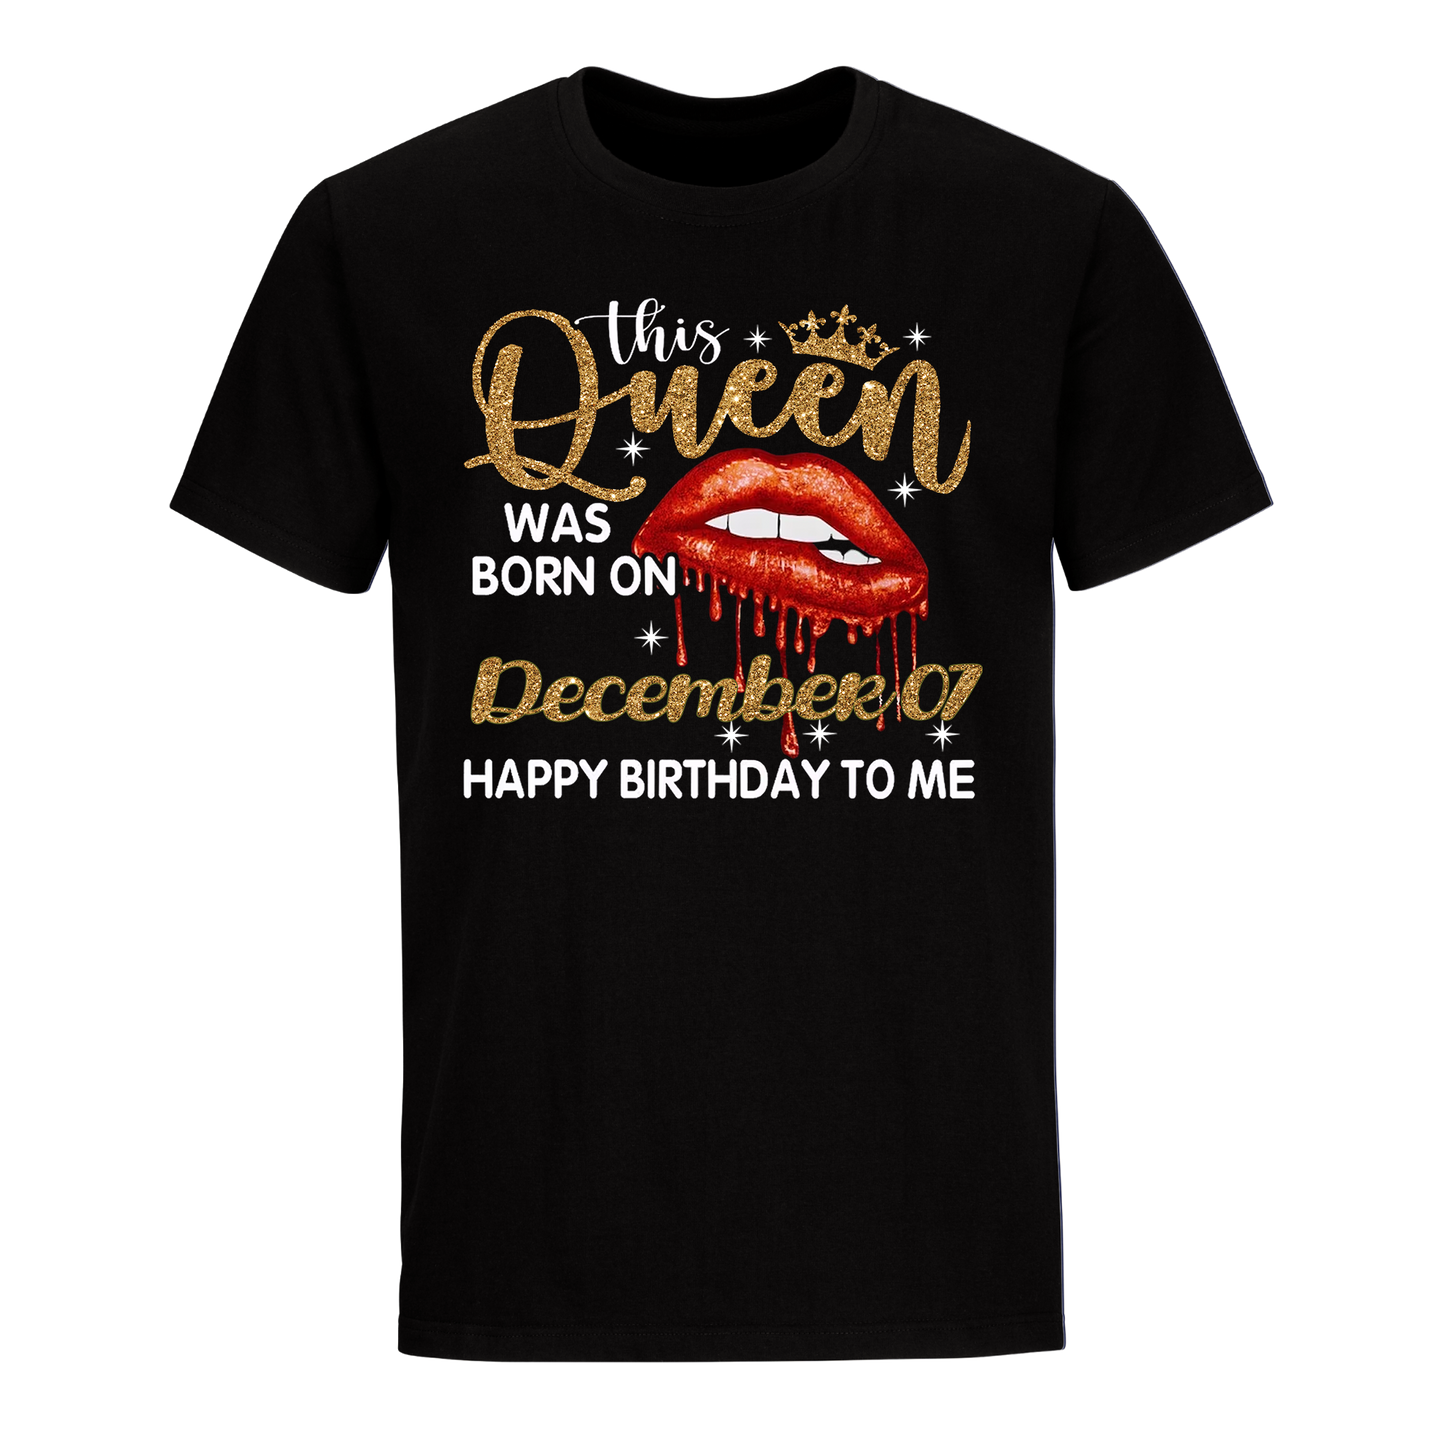 THIS QUEEN WAS BORN ON DECEMBER 07 UNISEX SHIRT